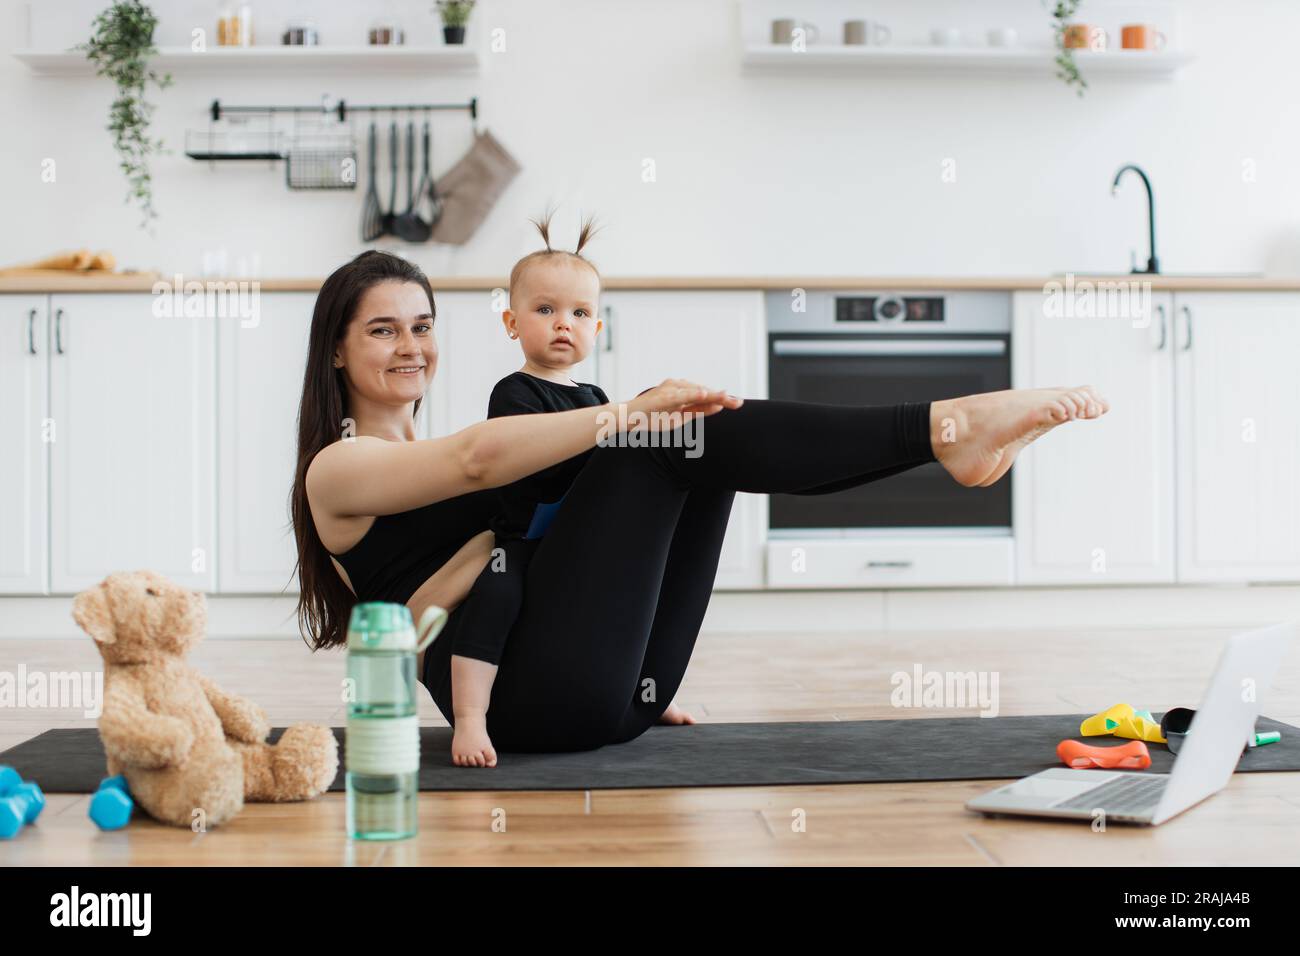 https://c8.alamy.com/comp/2RAJA4B/cheerful-young-lady-in-sportswear-holding-boat-pose-with-cute-baby-girl-on-laps-in-modern-apartment-sporty-adult-mom-doing-baby-yoga-with-little-daughter-using-online-video-on-laptop-at-home-2RAJA4B.jpg